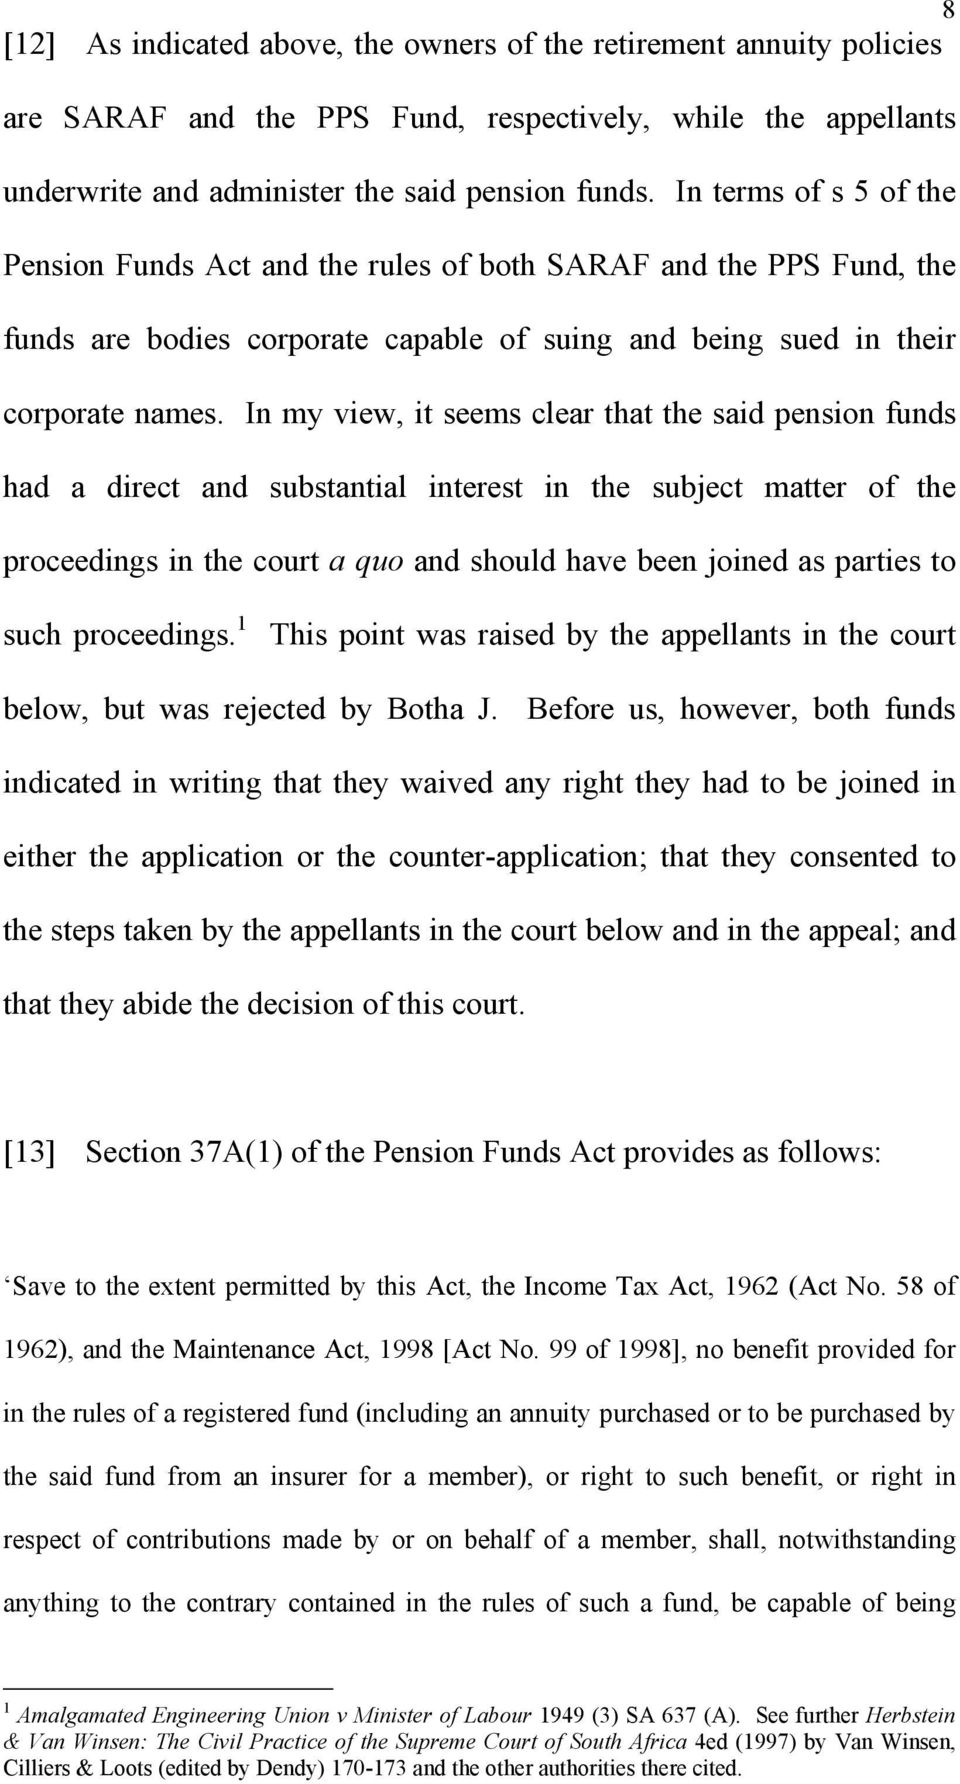 In my view, it seems clear that the said pension funds had a direct and substantial interest in the subject matter of the proceedings in the court a quo and should have been joined as parties to such